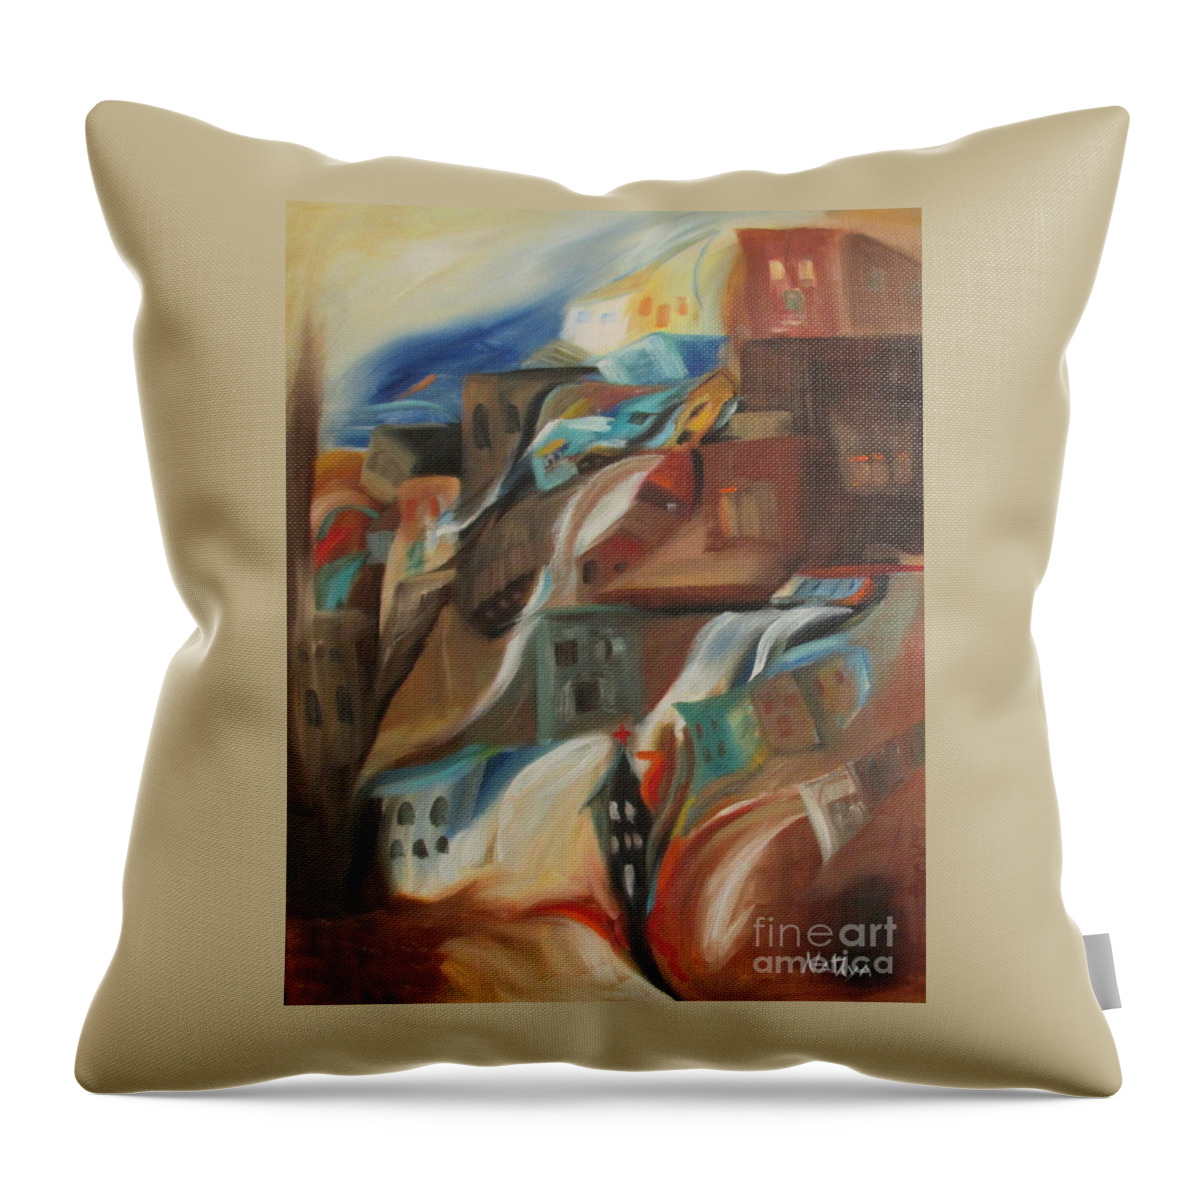 Town Throw Pillow featuring the painting Sleepy Town by Nataya Crow